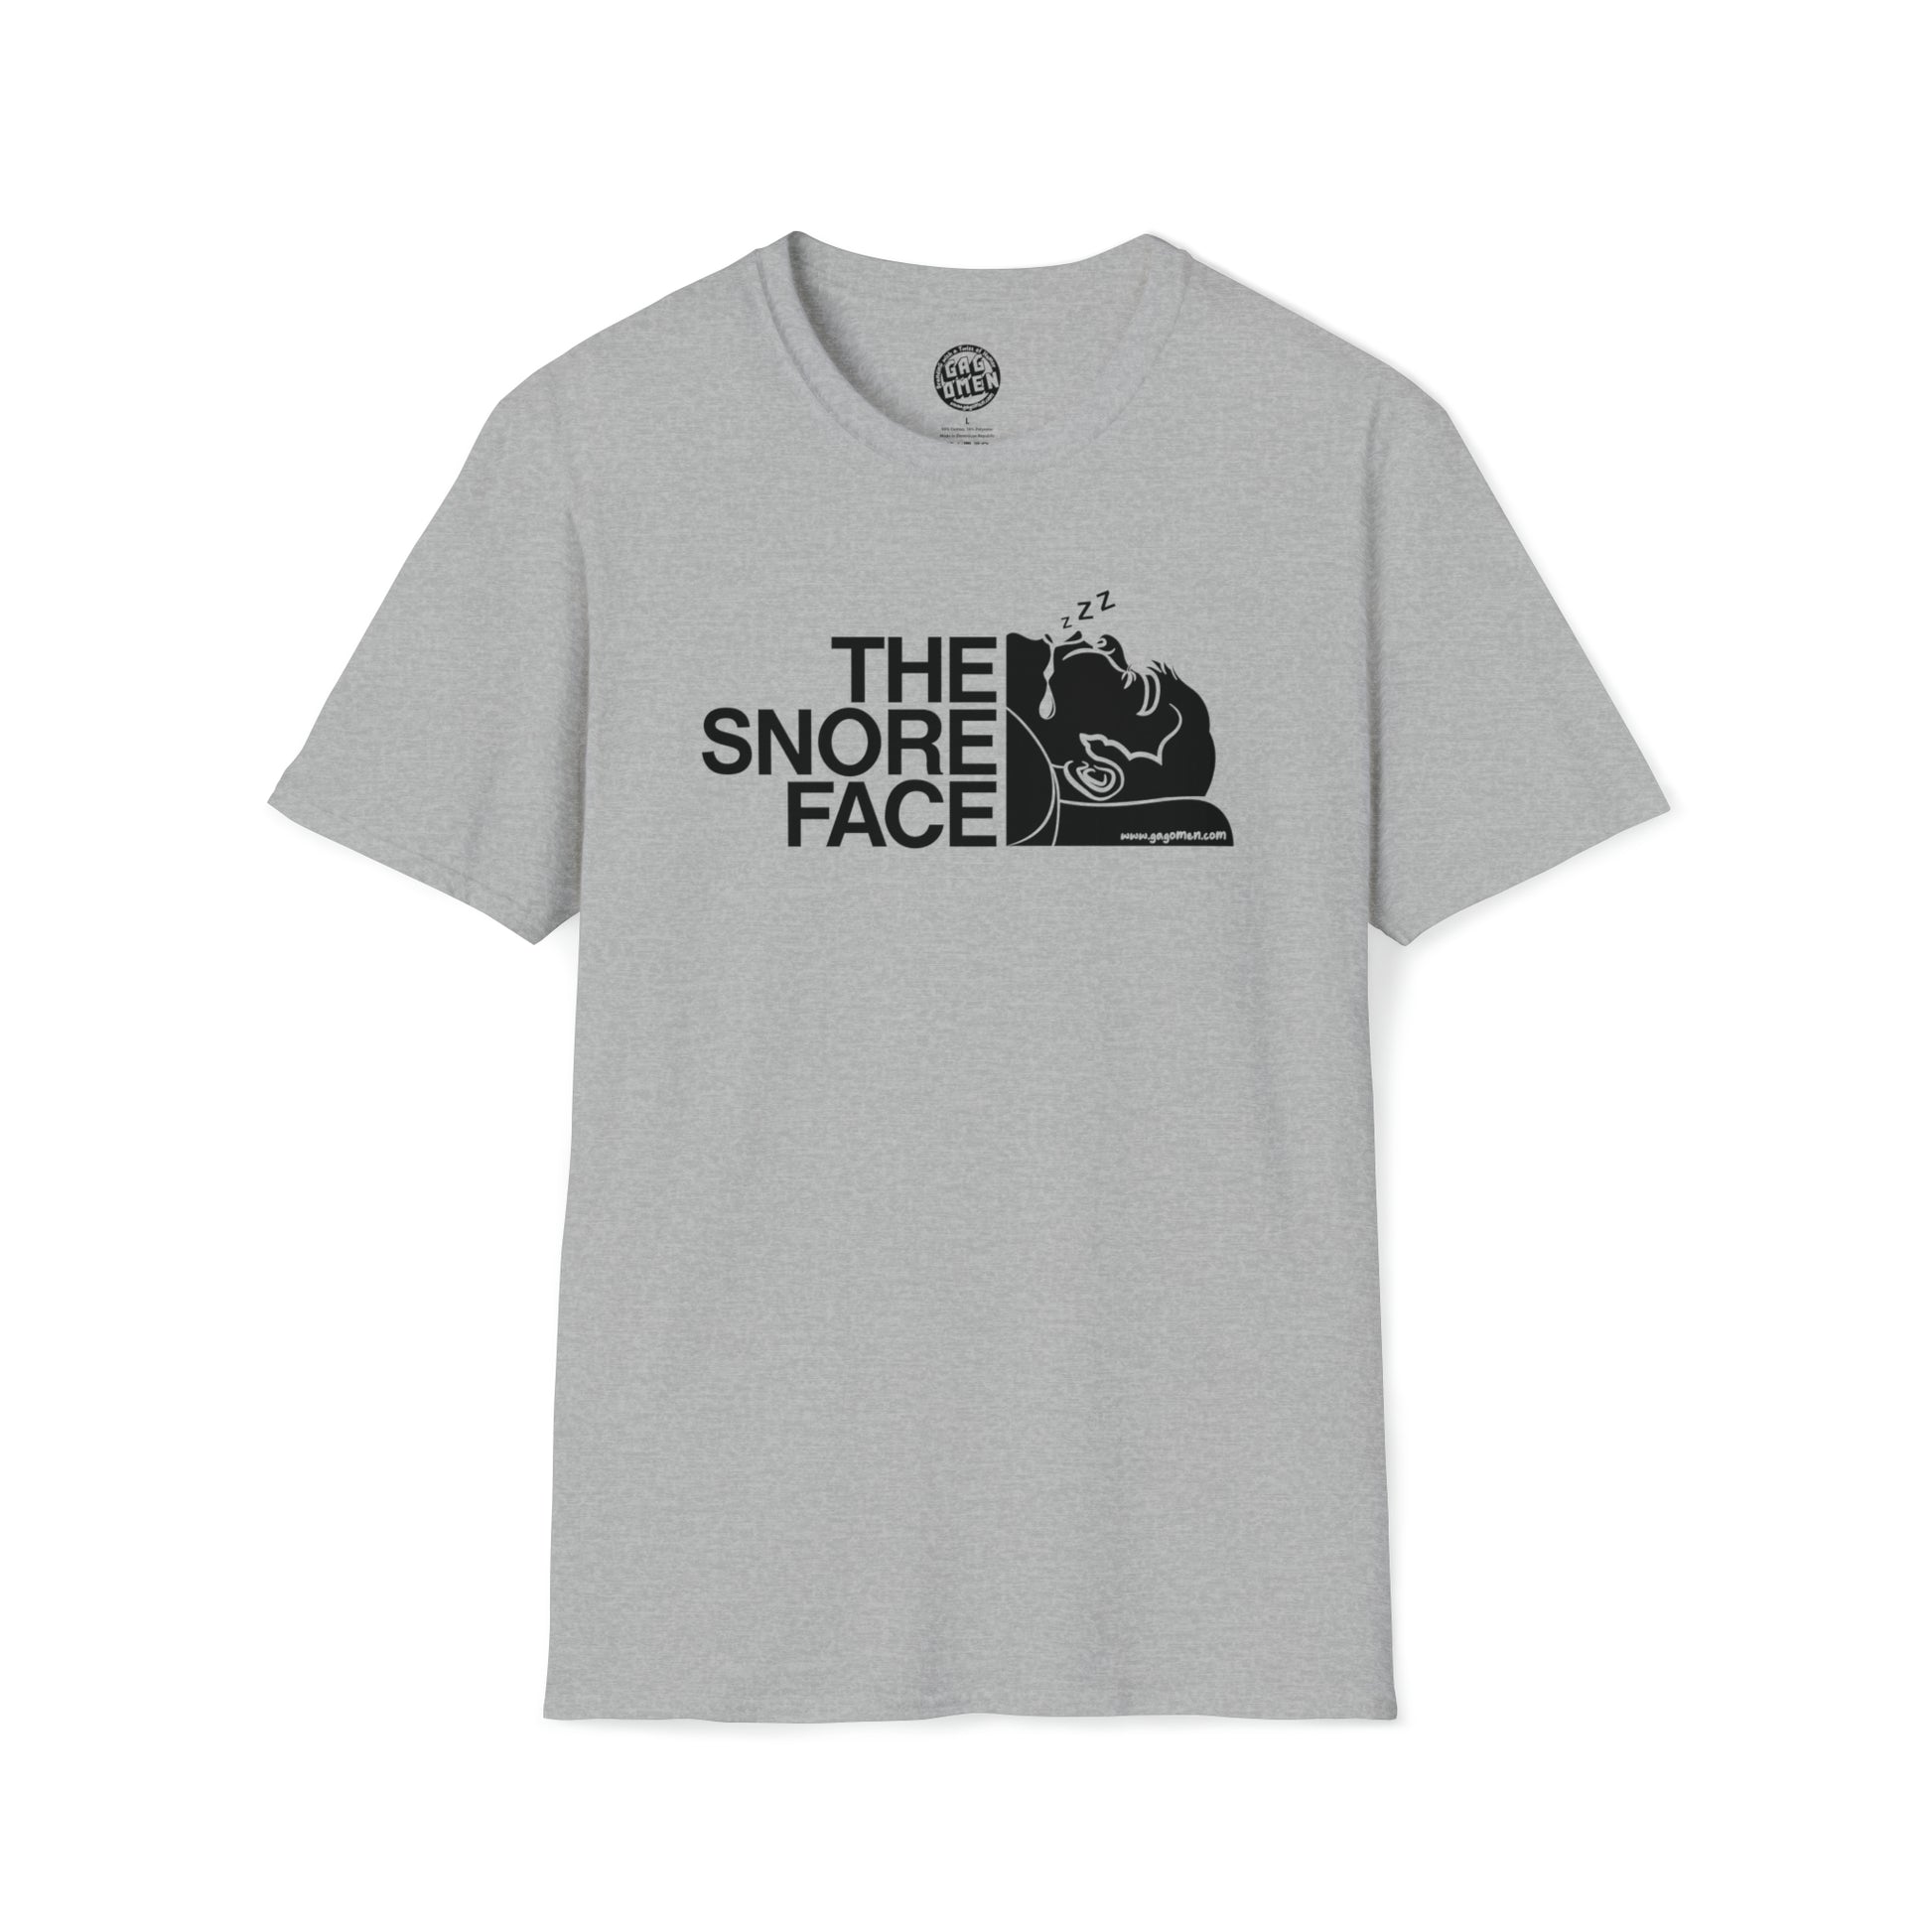 funny the north face t shirt, brand parody t shirt, funny t-shirts, parody t-shirts, funny outdoor t-shirt, funny hiking t-shirt, funny camping t-shirt